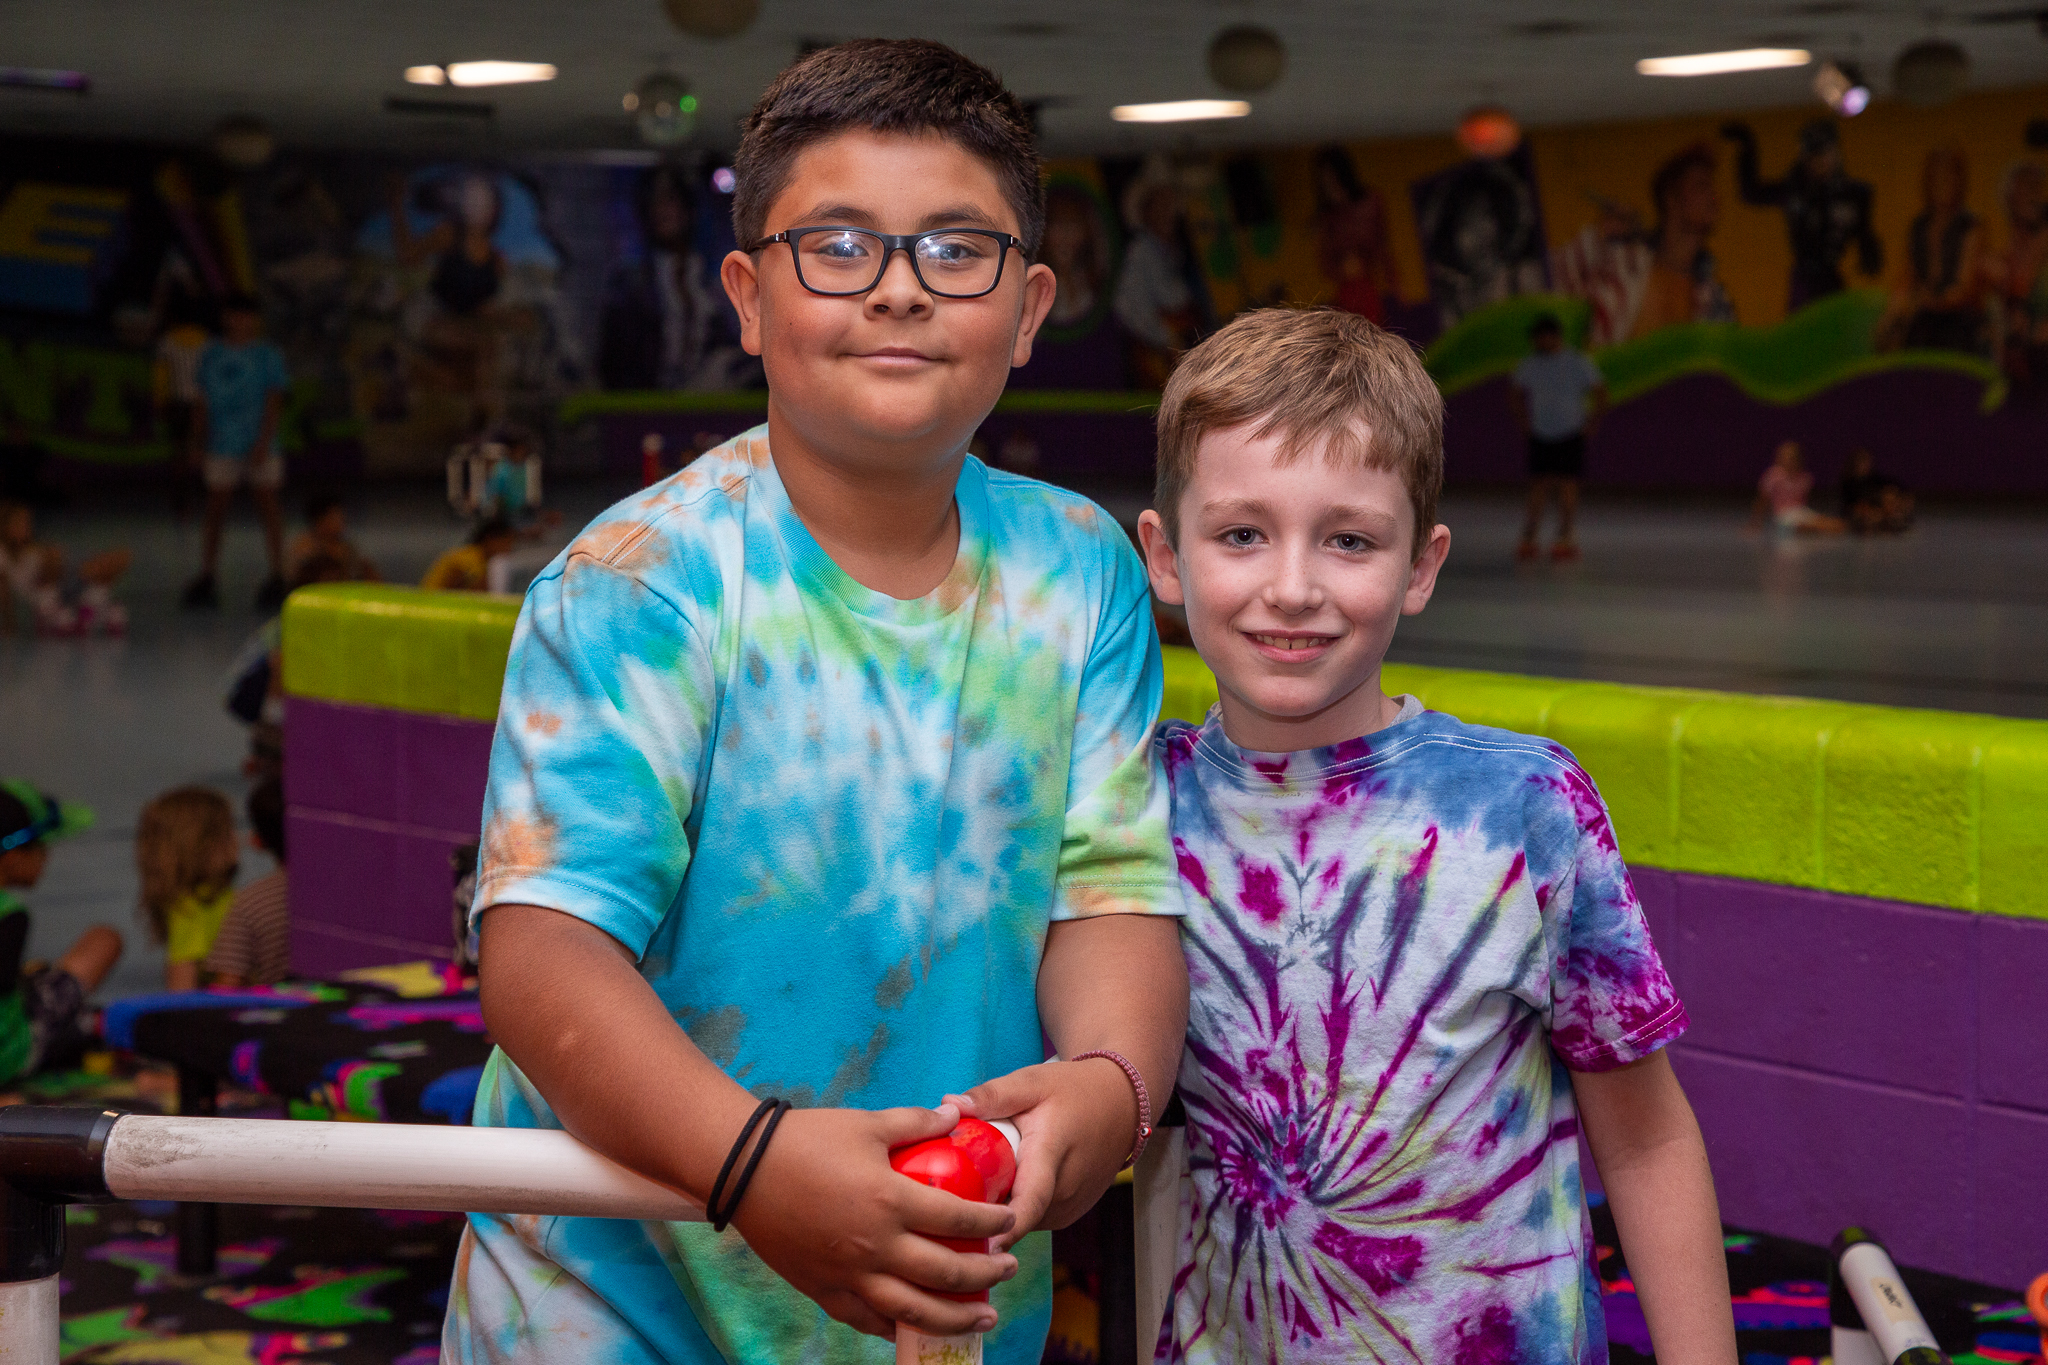 Two boys in tie-dye shirts smile at the roller skating rink